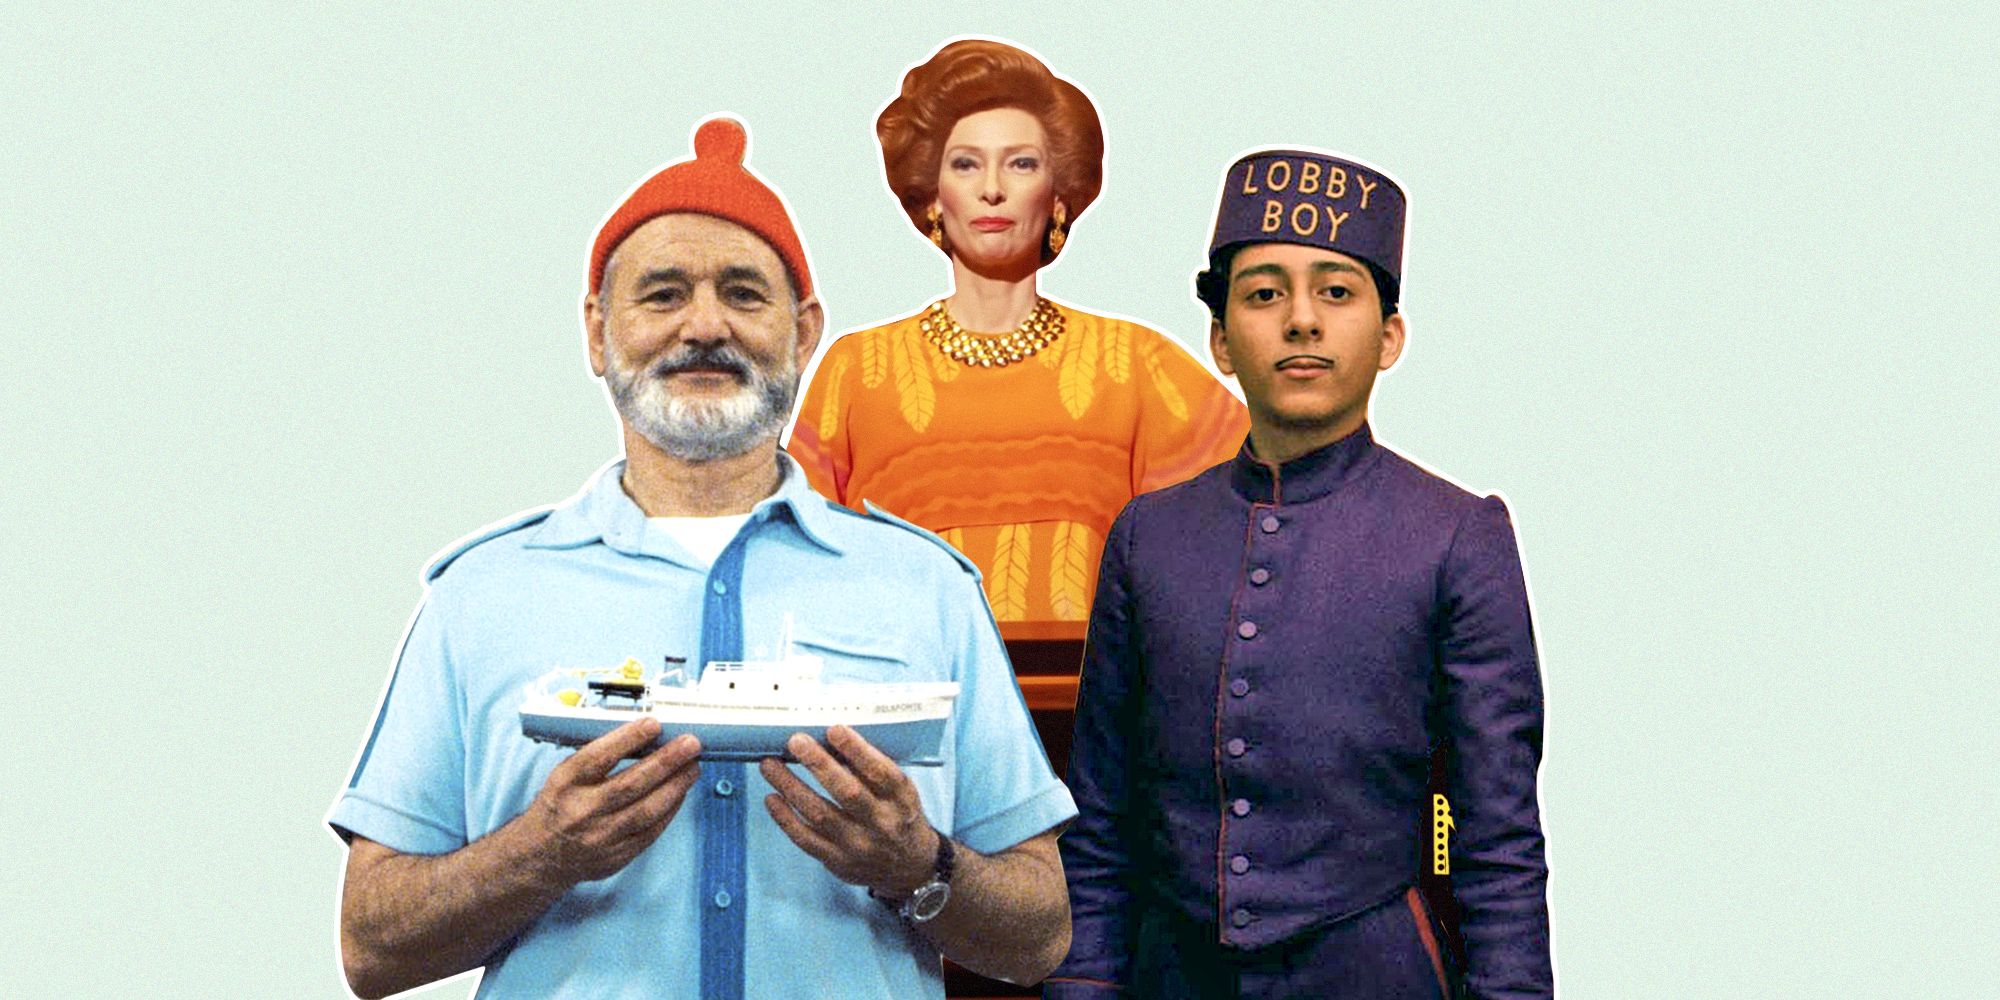 Wes Anderson Stumbles With His Alienating New Movie, 'The French